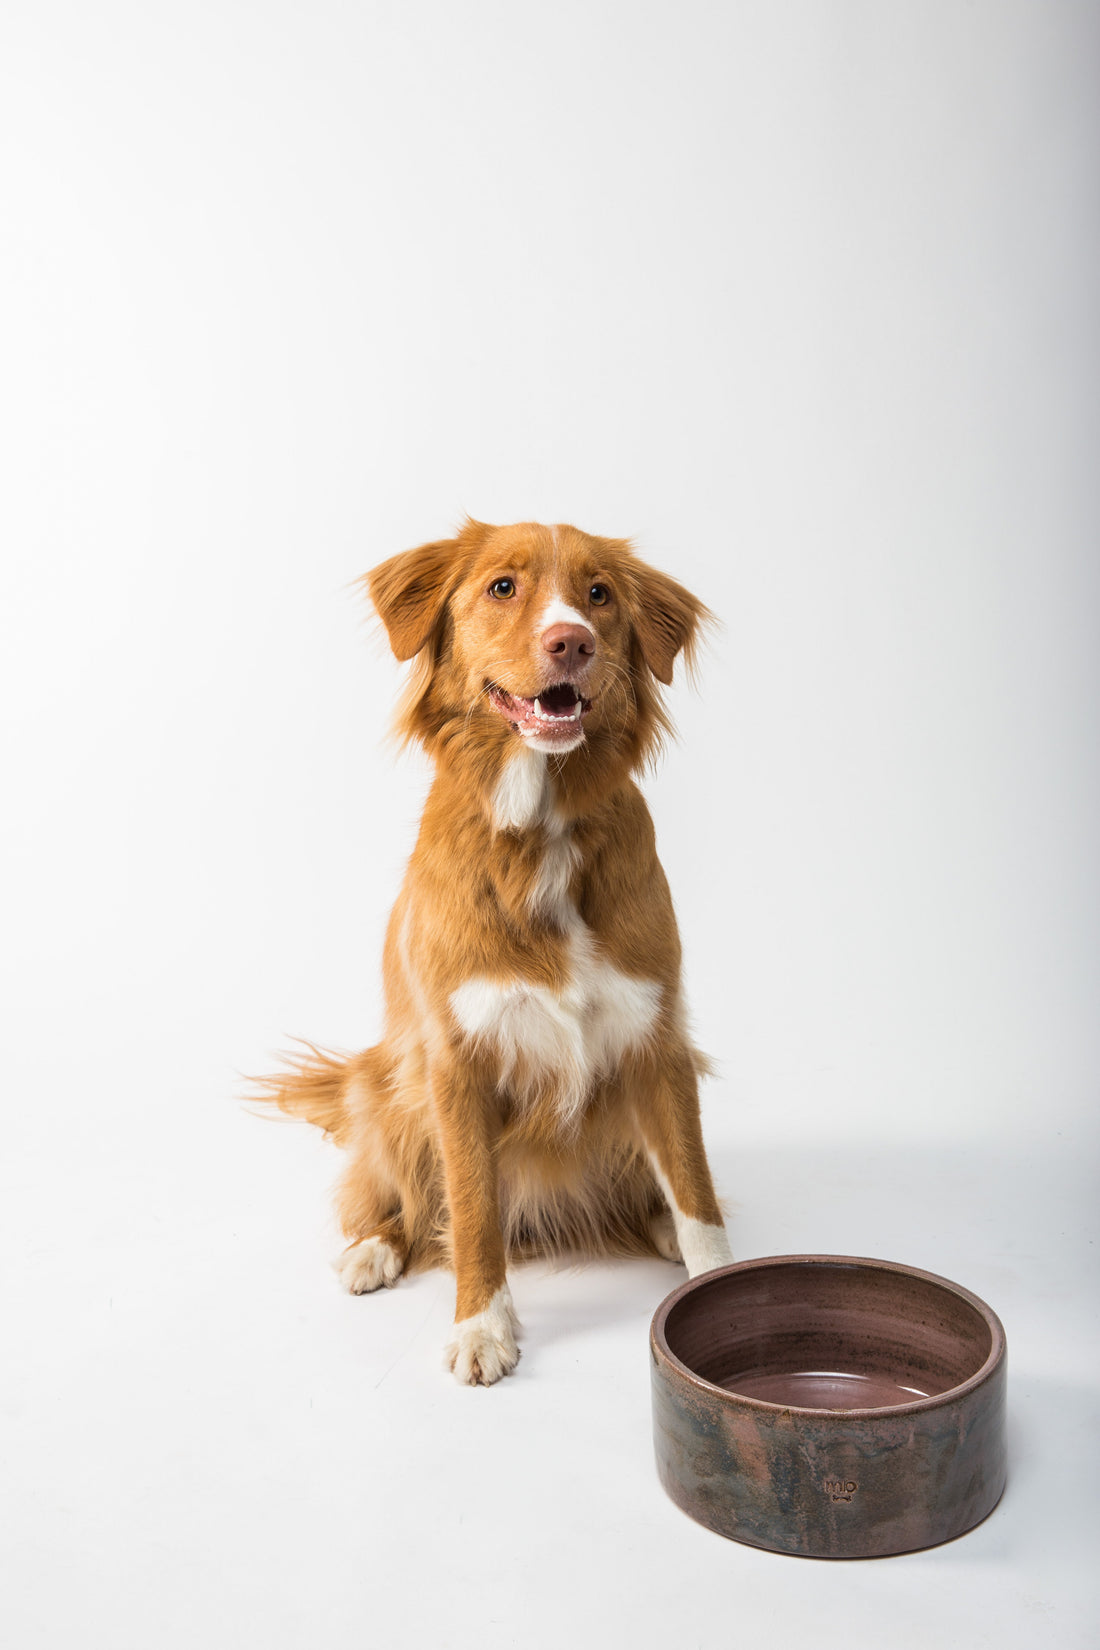 When To Give Healthy High Fat Treats To Your Dog